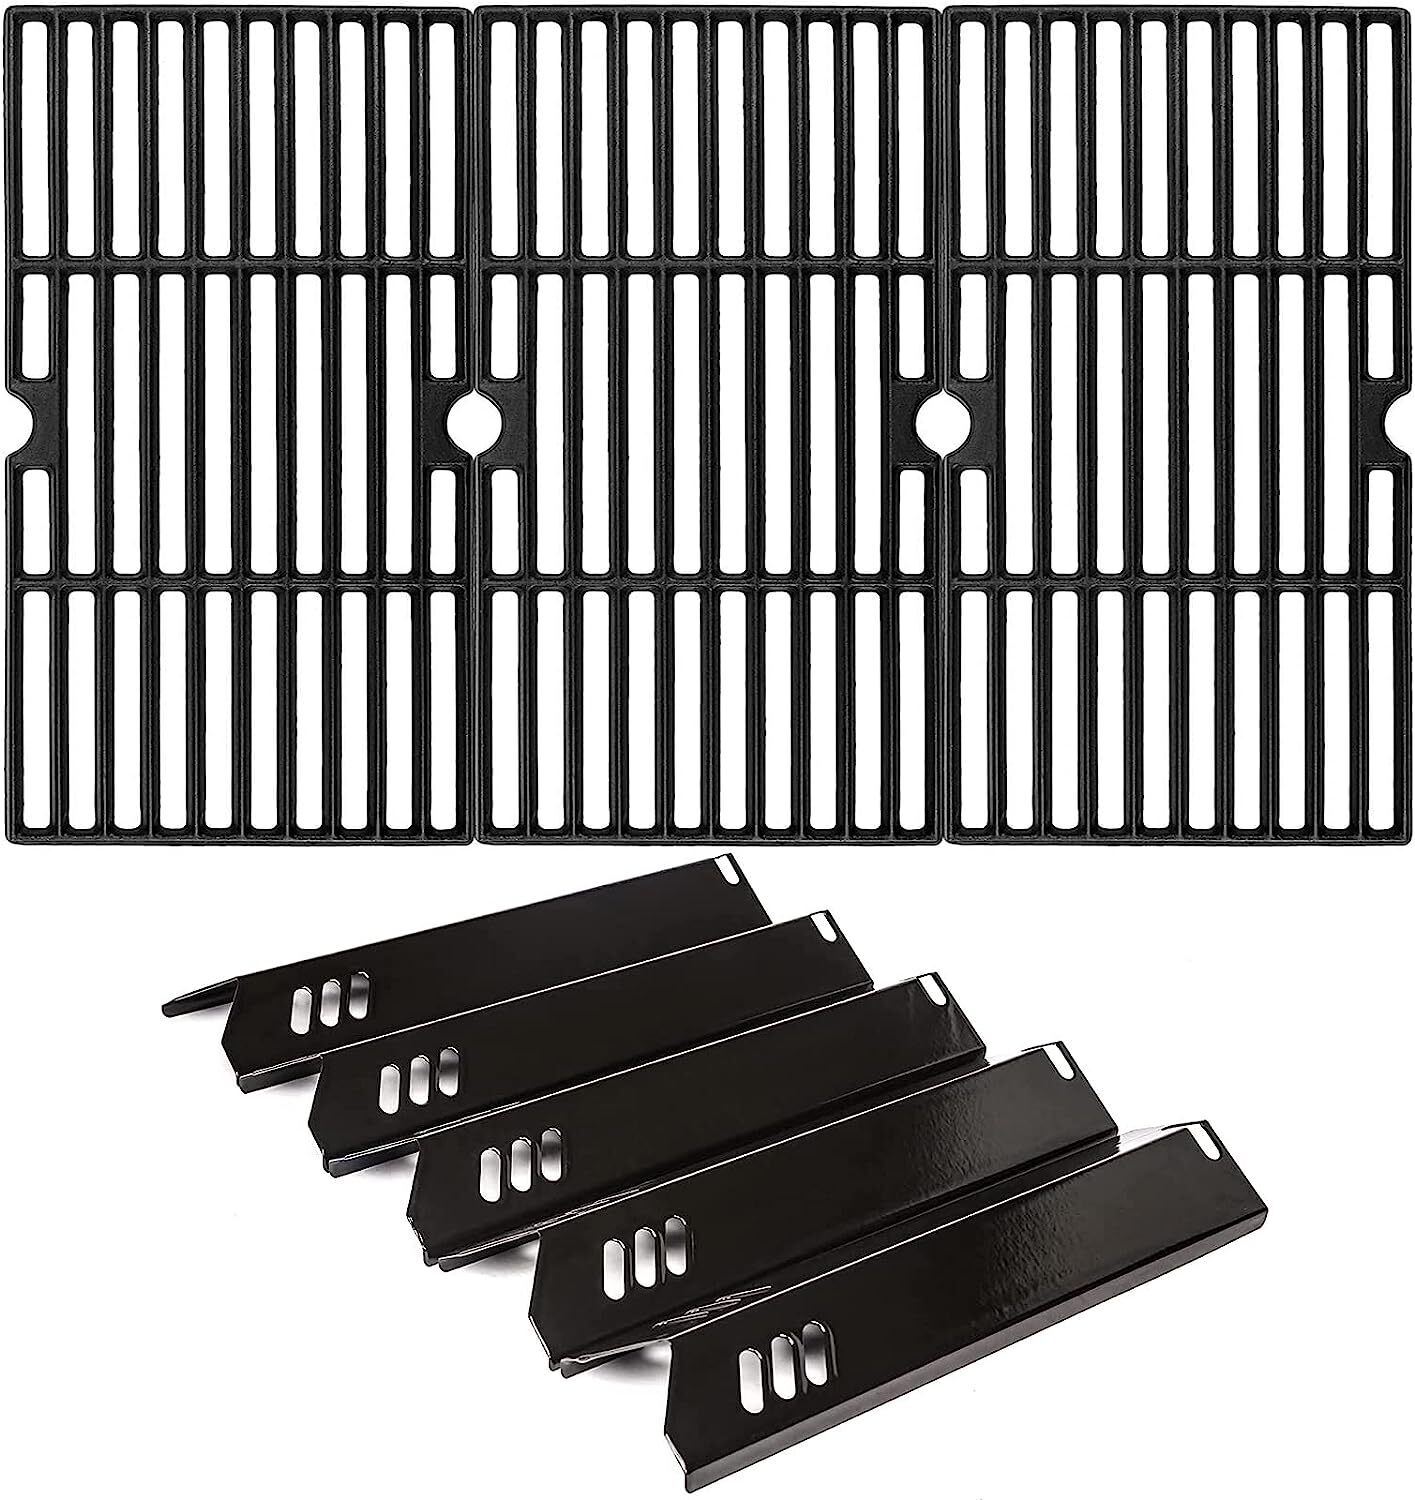 Heat Plate and Cooking Grid for Backyard BY13-101-001-13,BHG, Dyna-glo, Uniflame